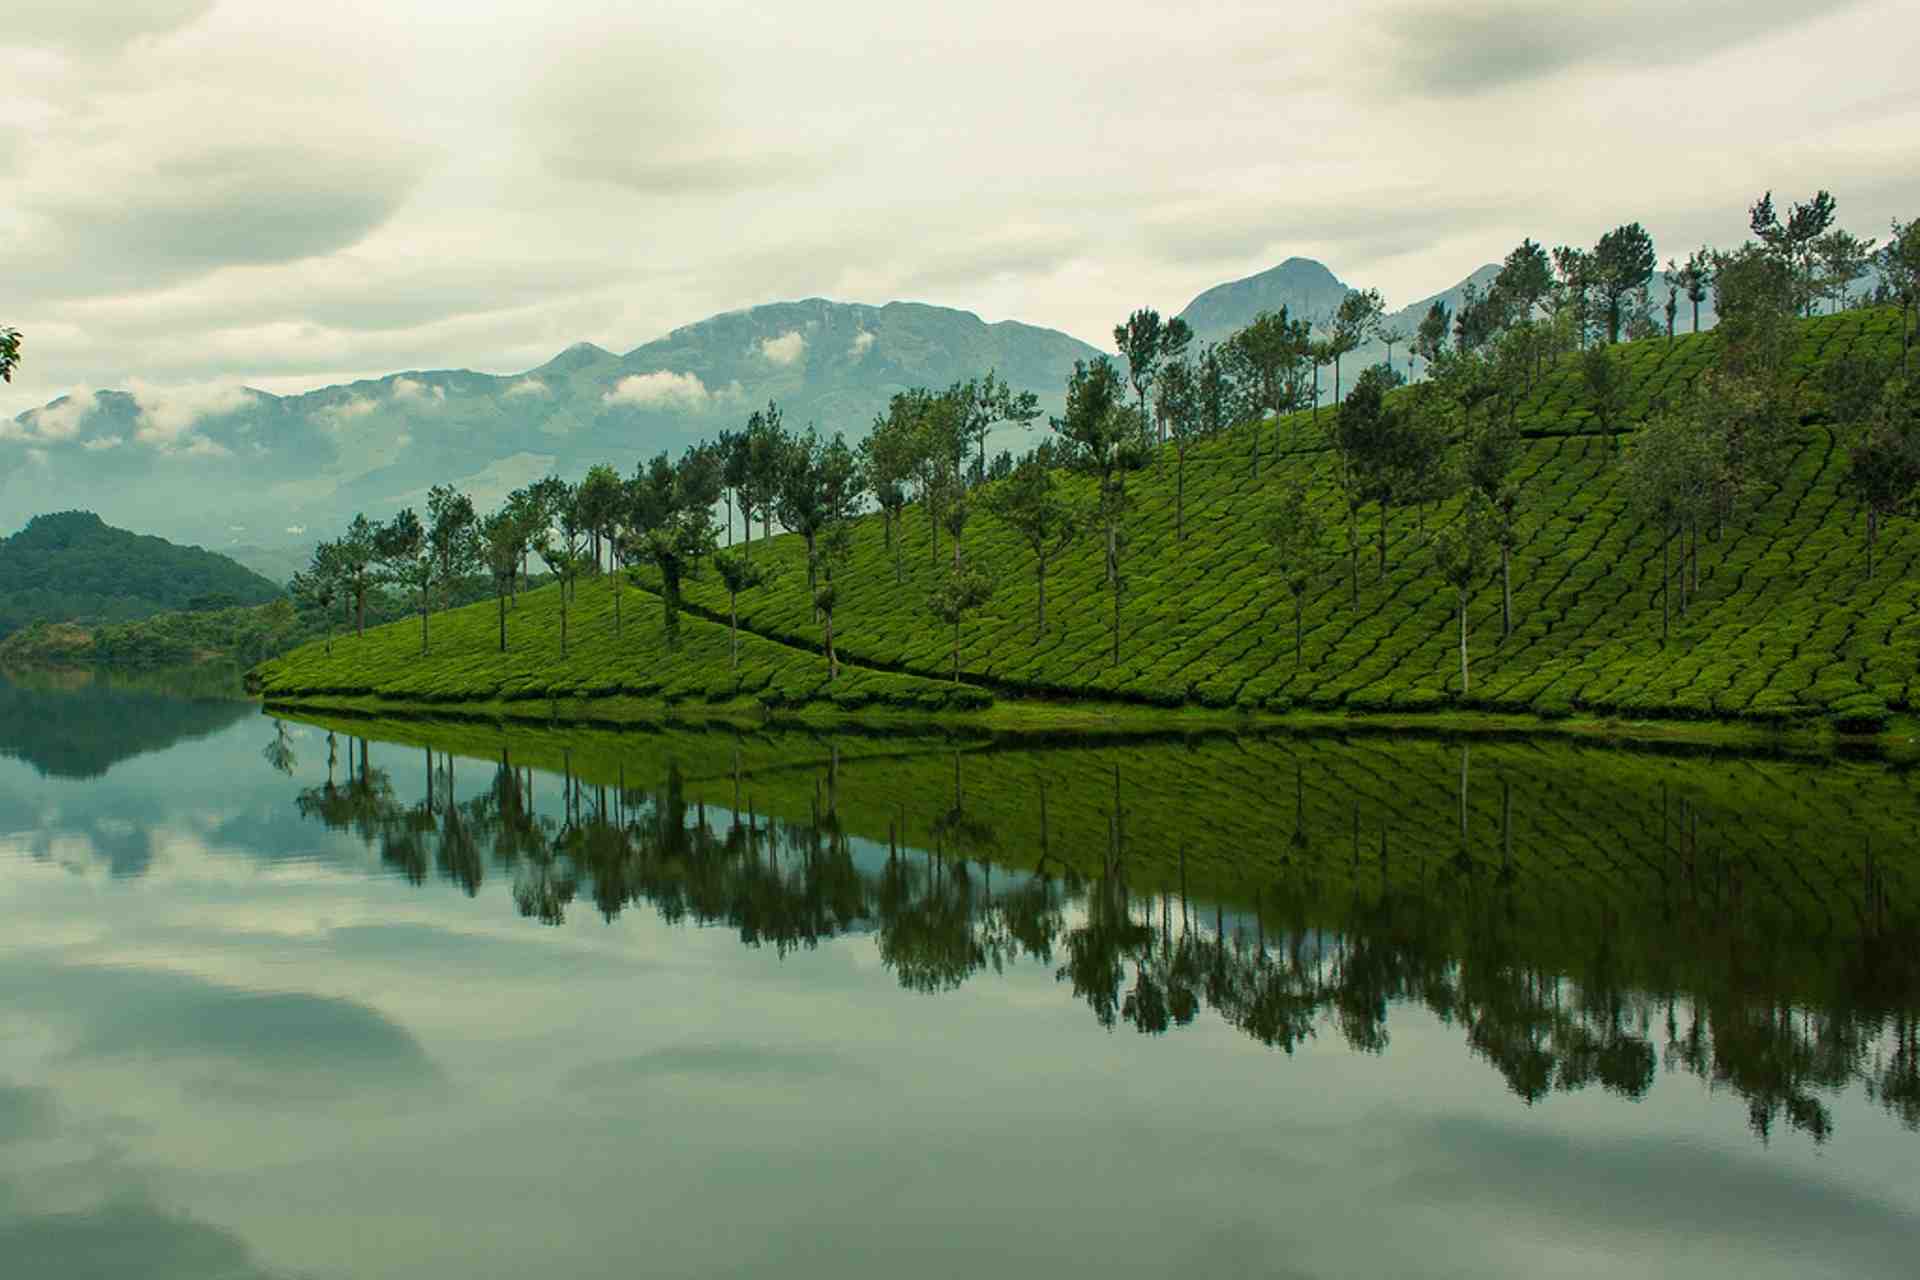 Water reflects the Tea Estate of Munnar